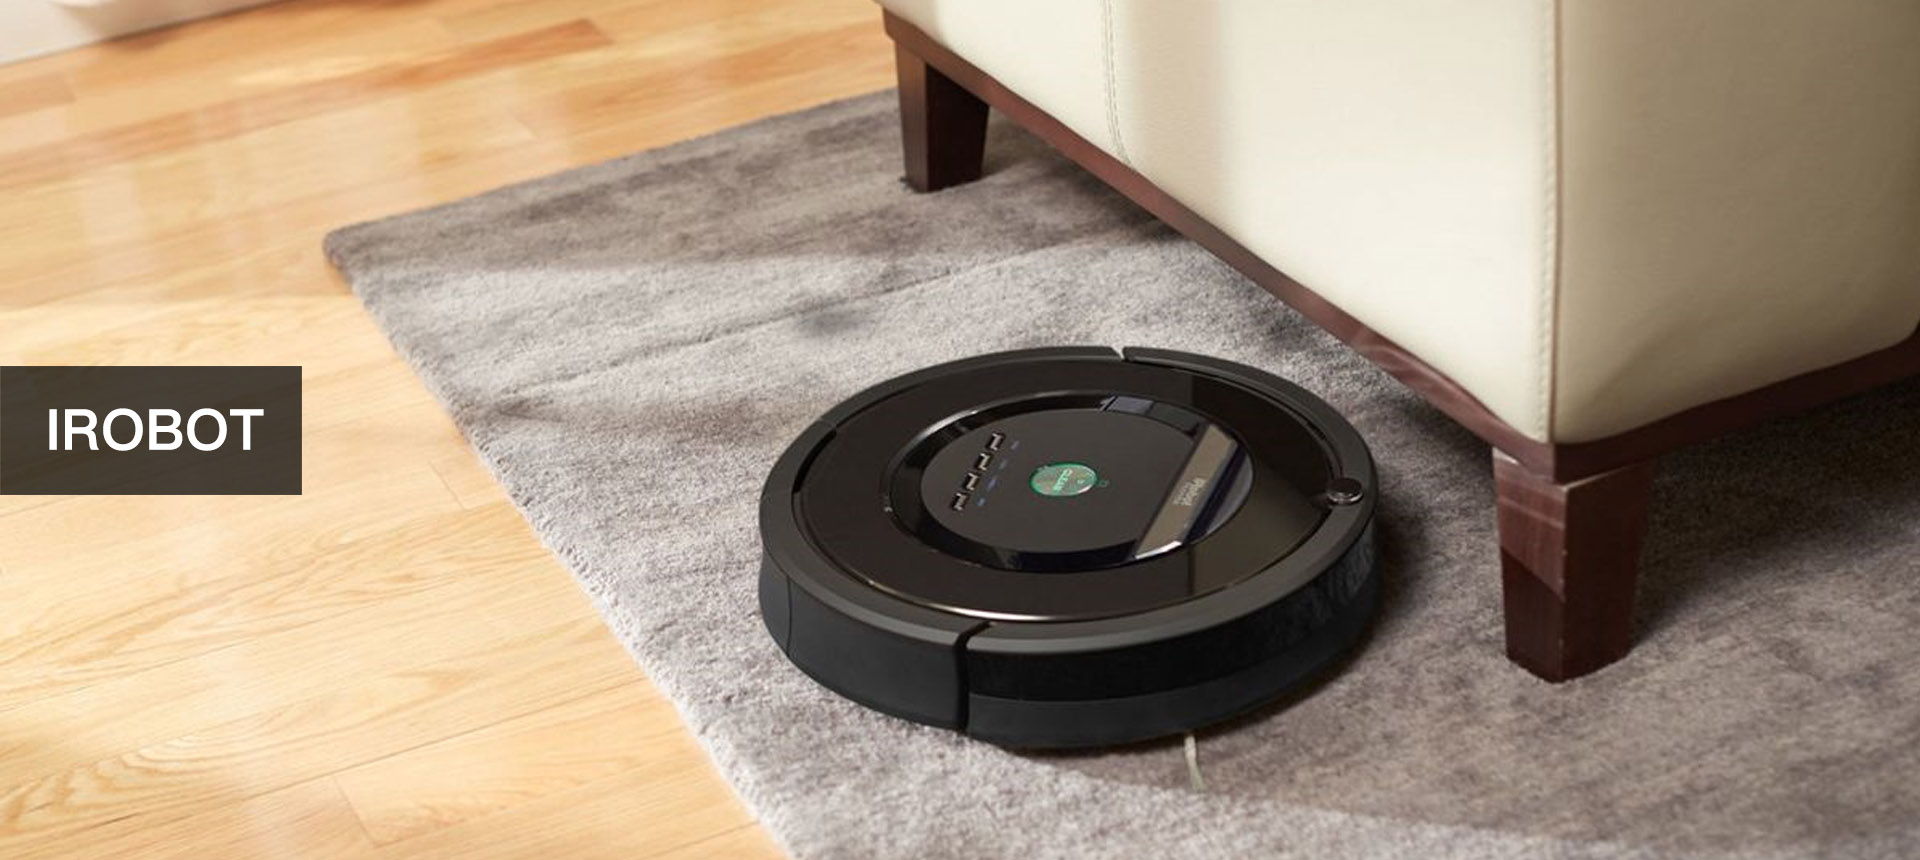 Irobot Robot Vacuum Reviews 2021 Which, Is Roomba Safe For Laminate Floors